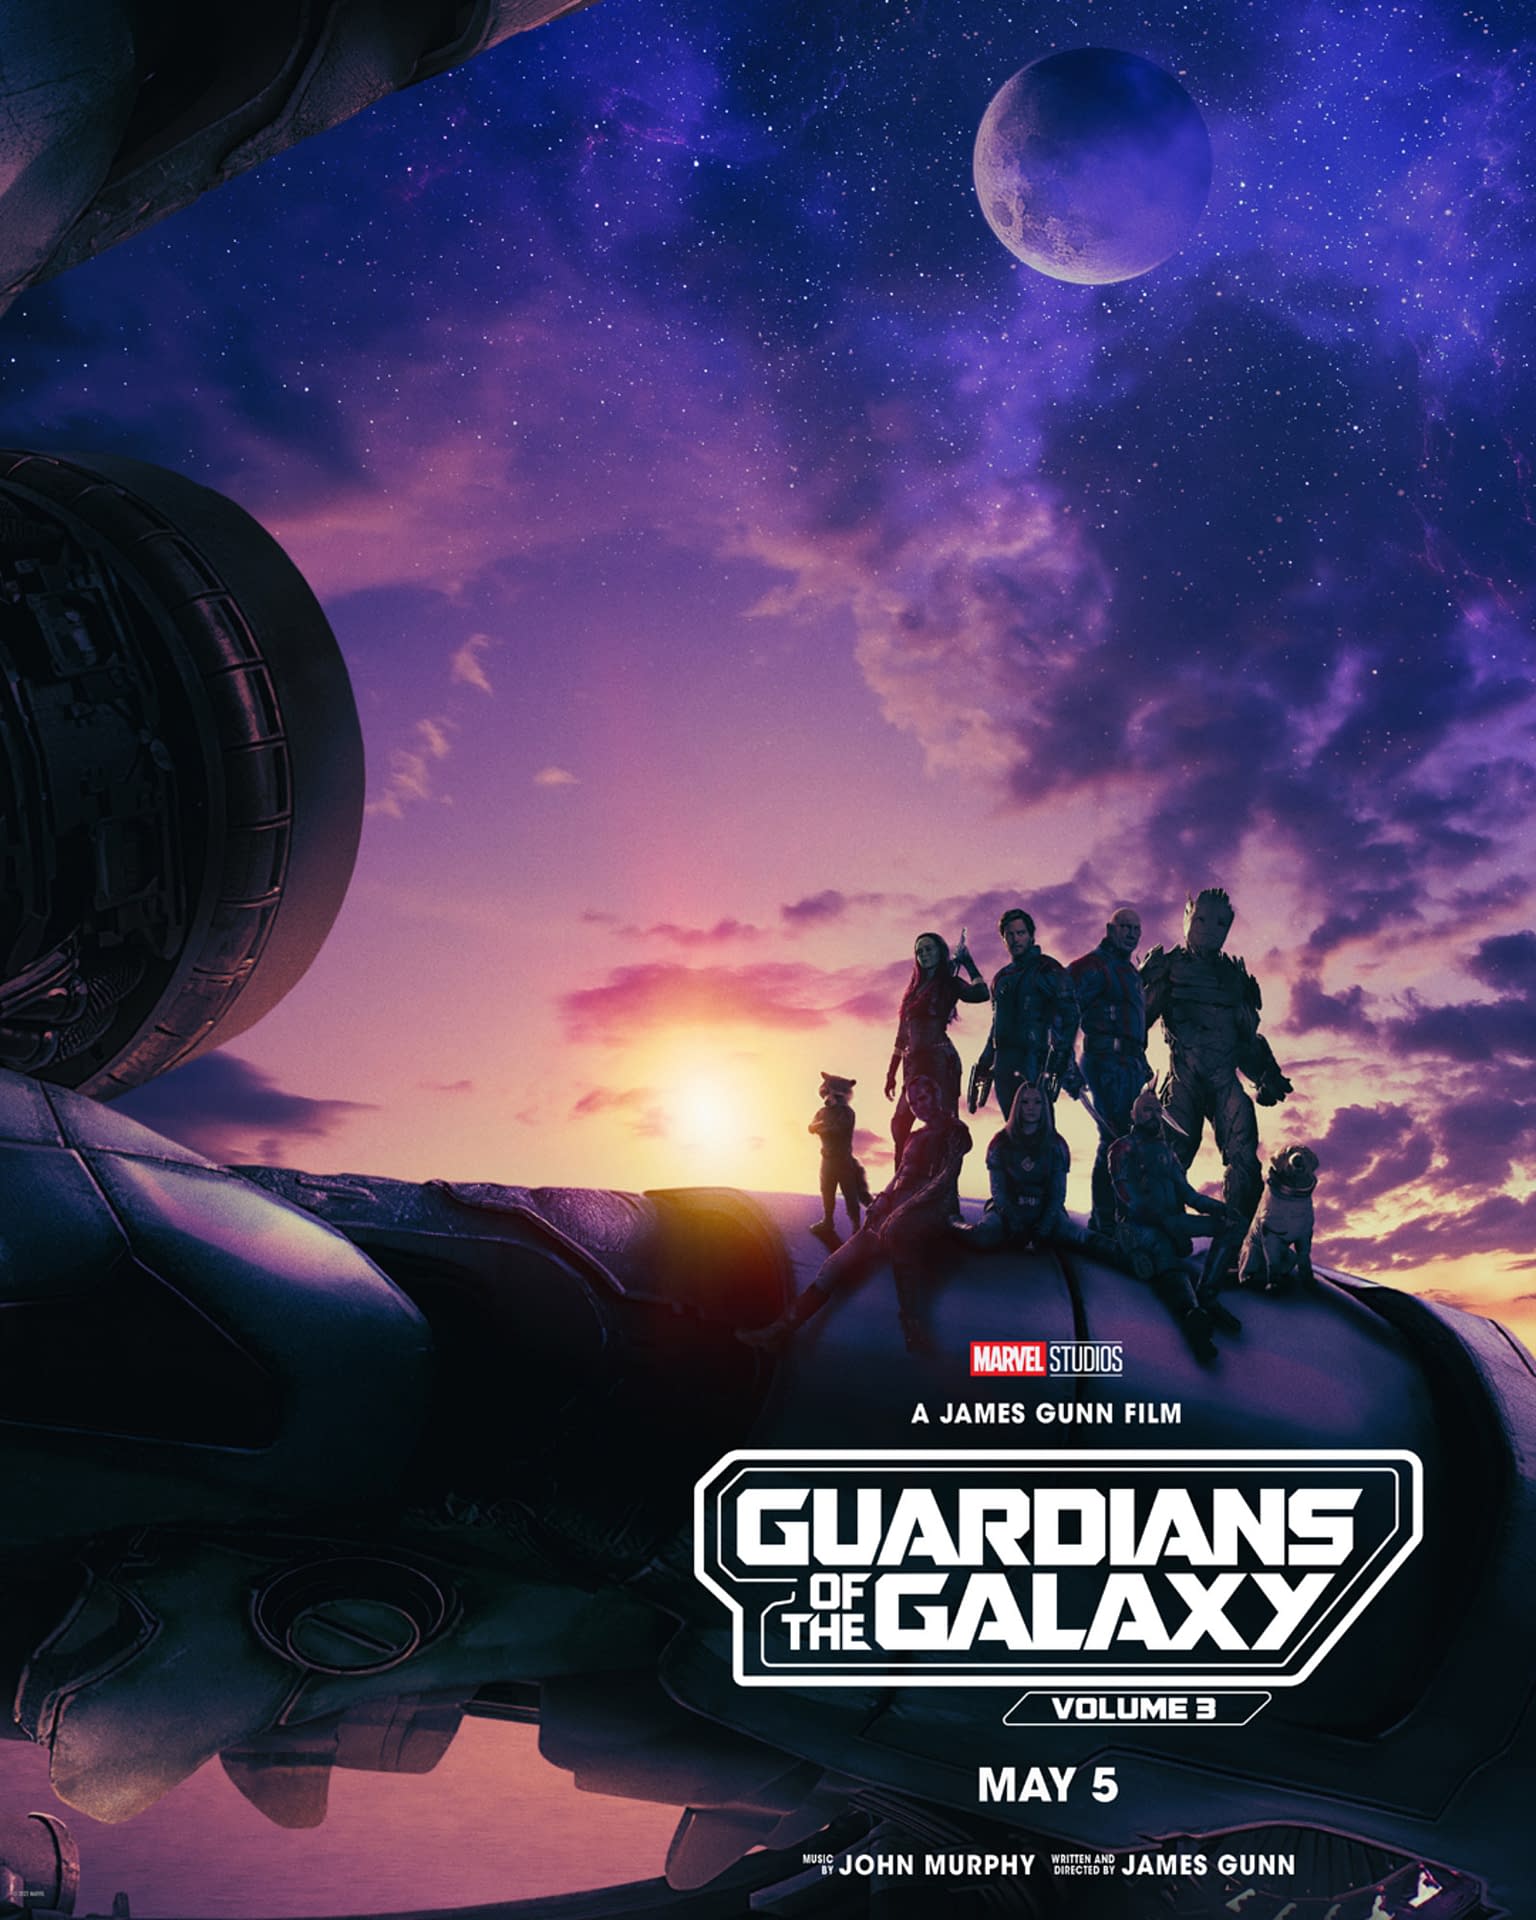 Guardians of the Galaxy Vol. 3 HQ Image of Peter and Gamora Released